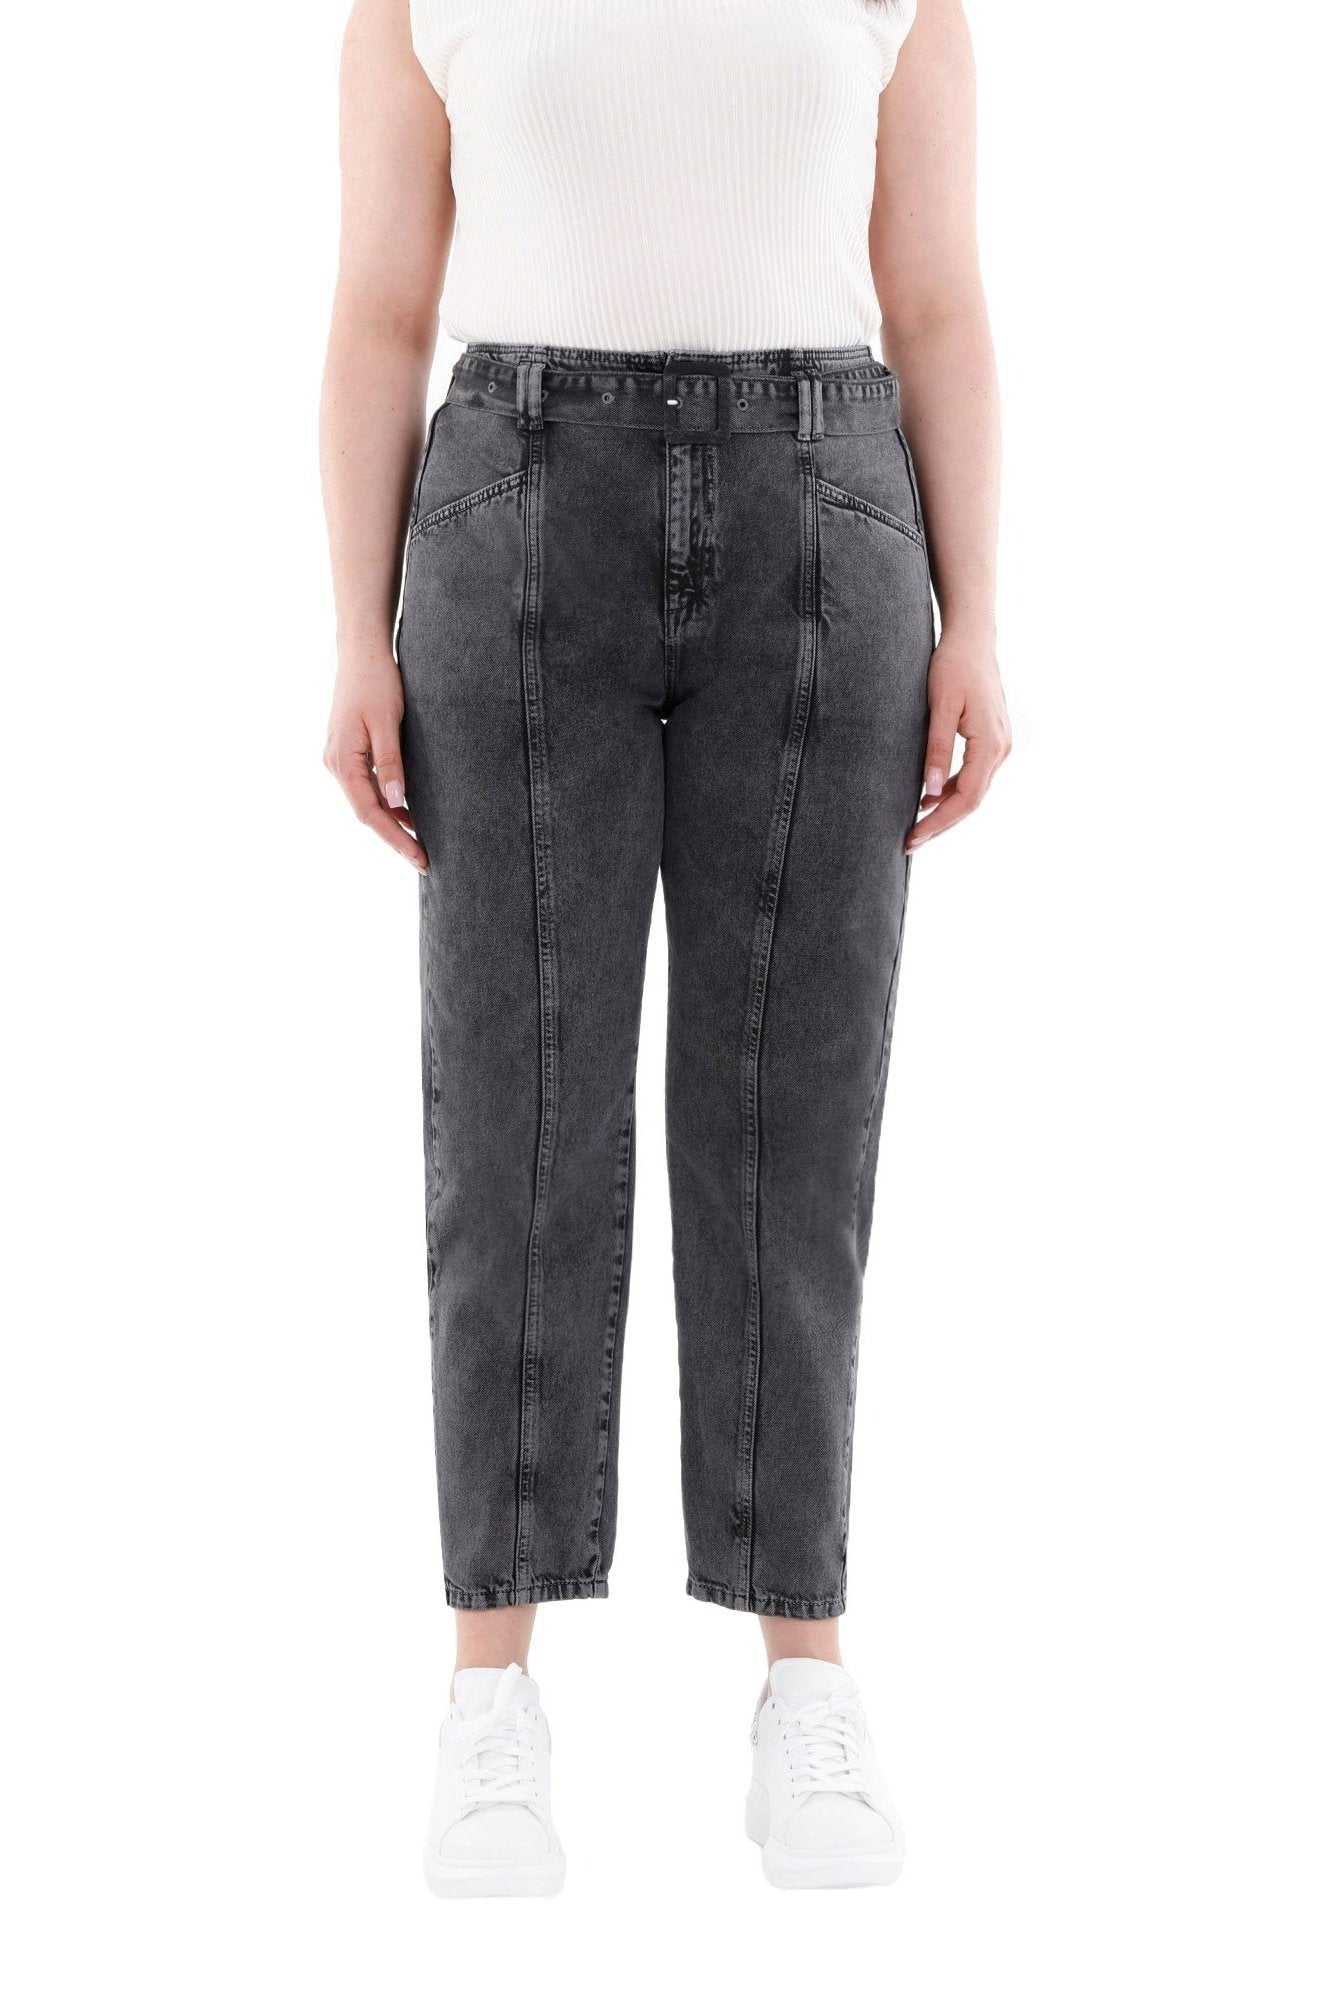 Tapered Black Jeans for Women Carrot Jeans with Jean Belt G-Line